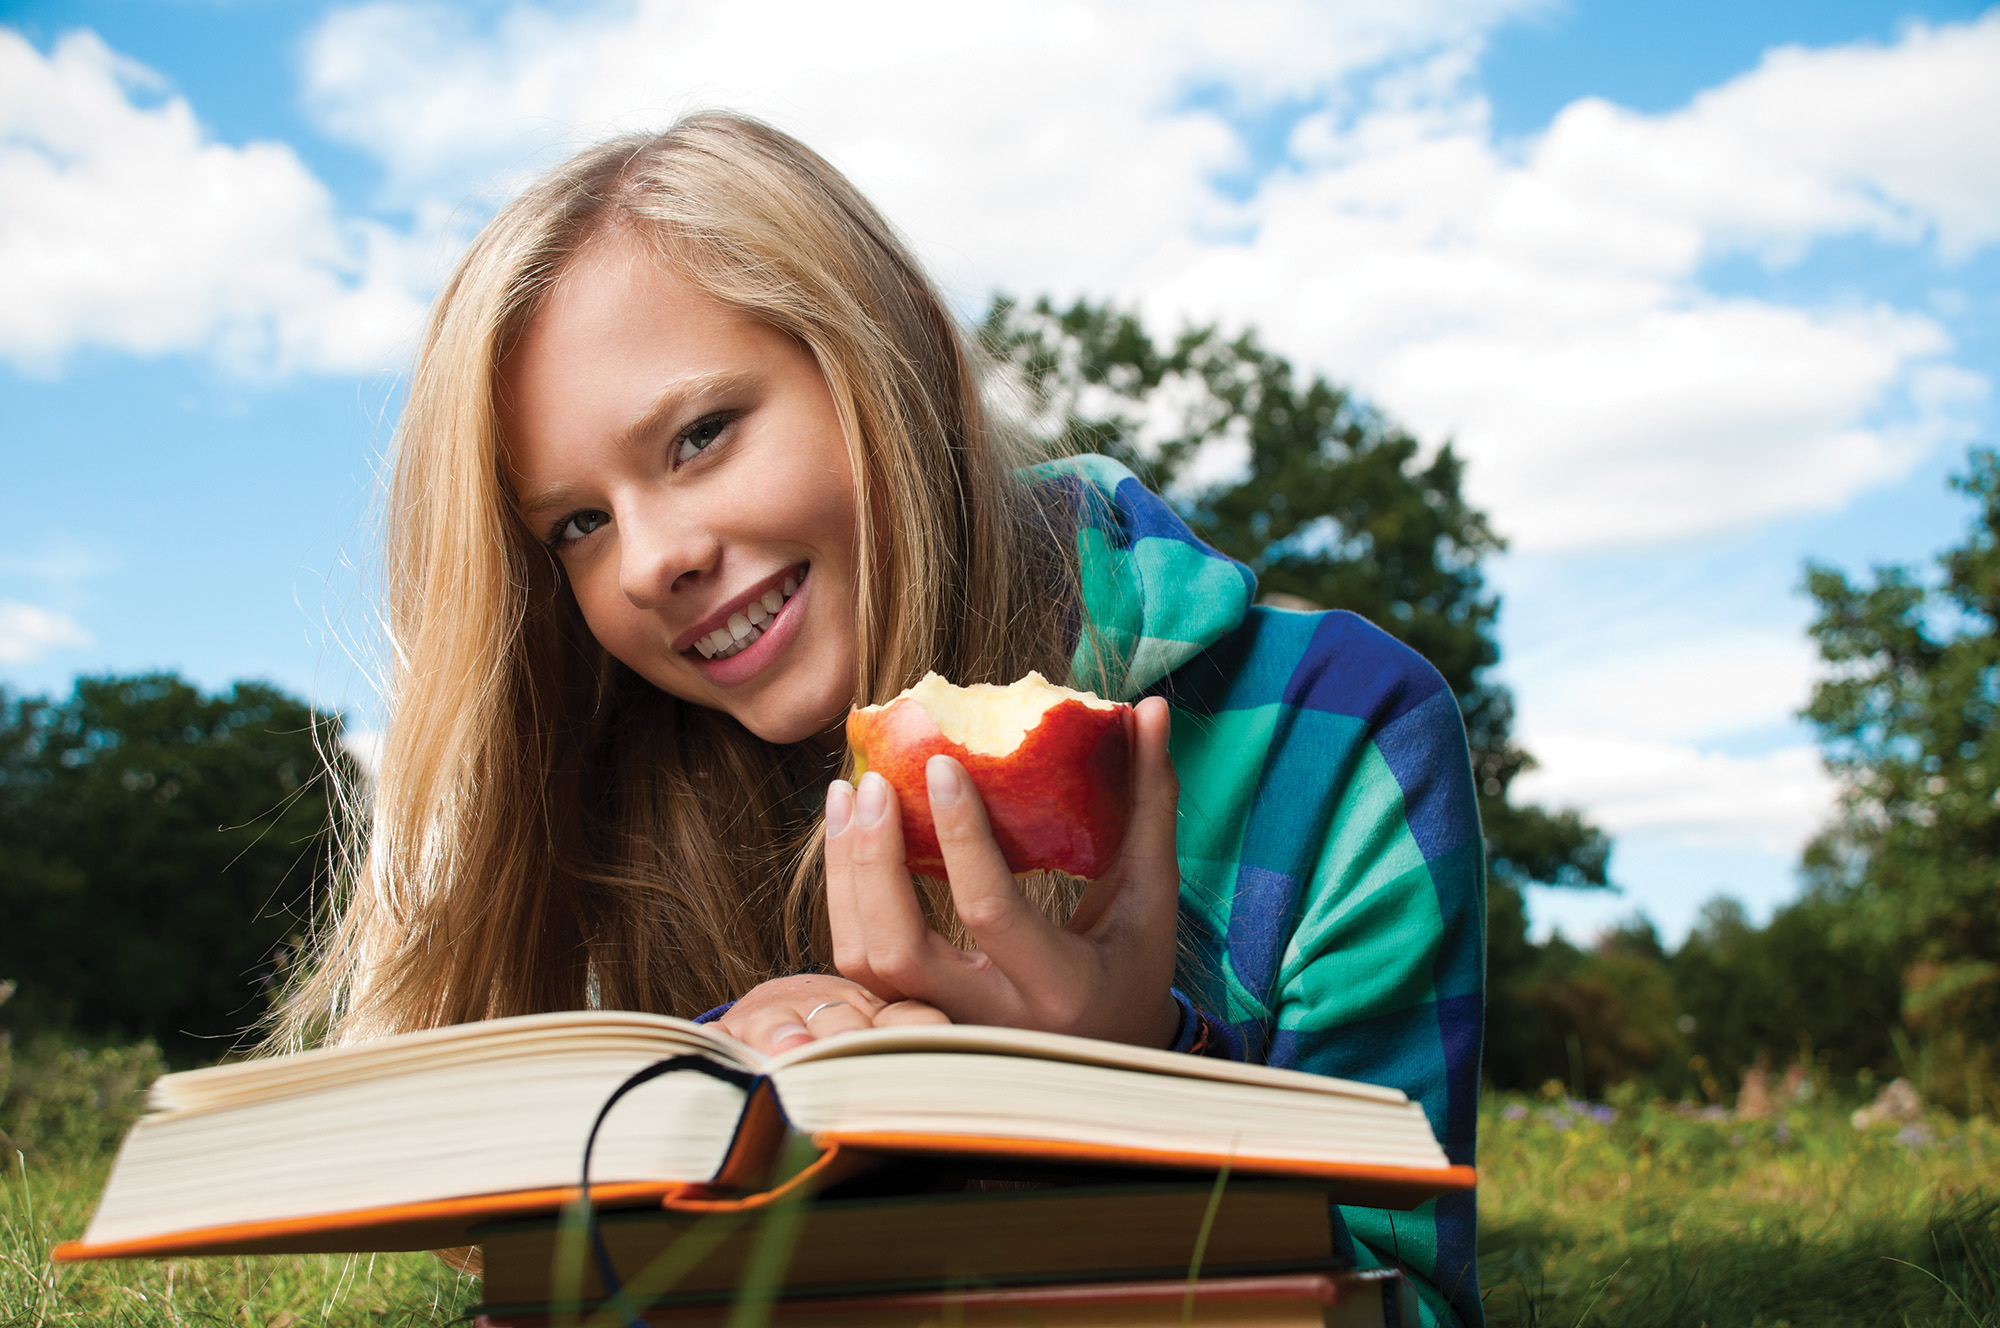 Smiling student sitting in grass and holding an apple